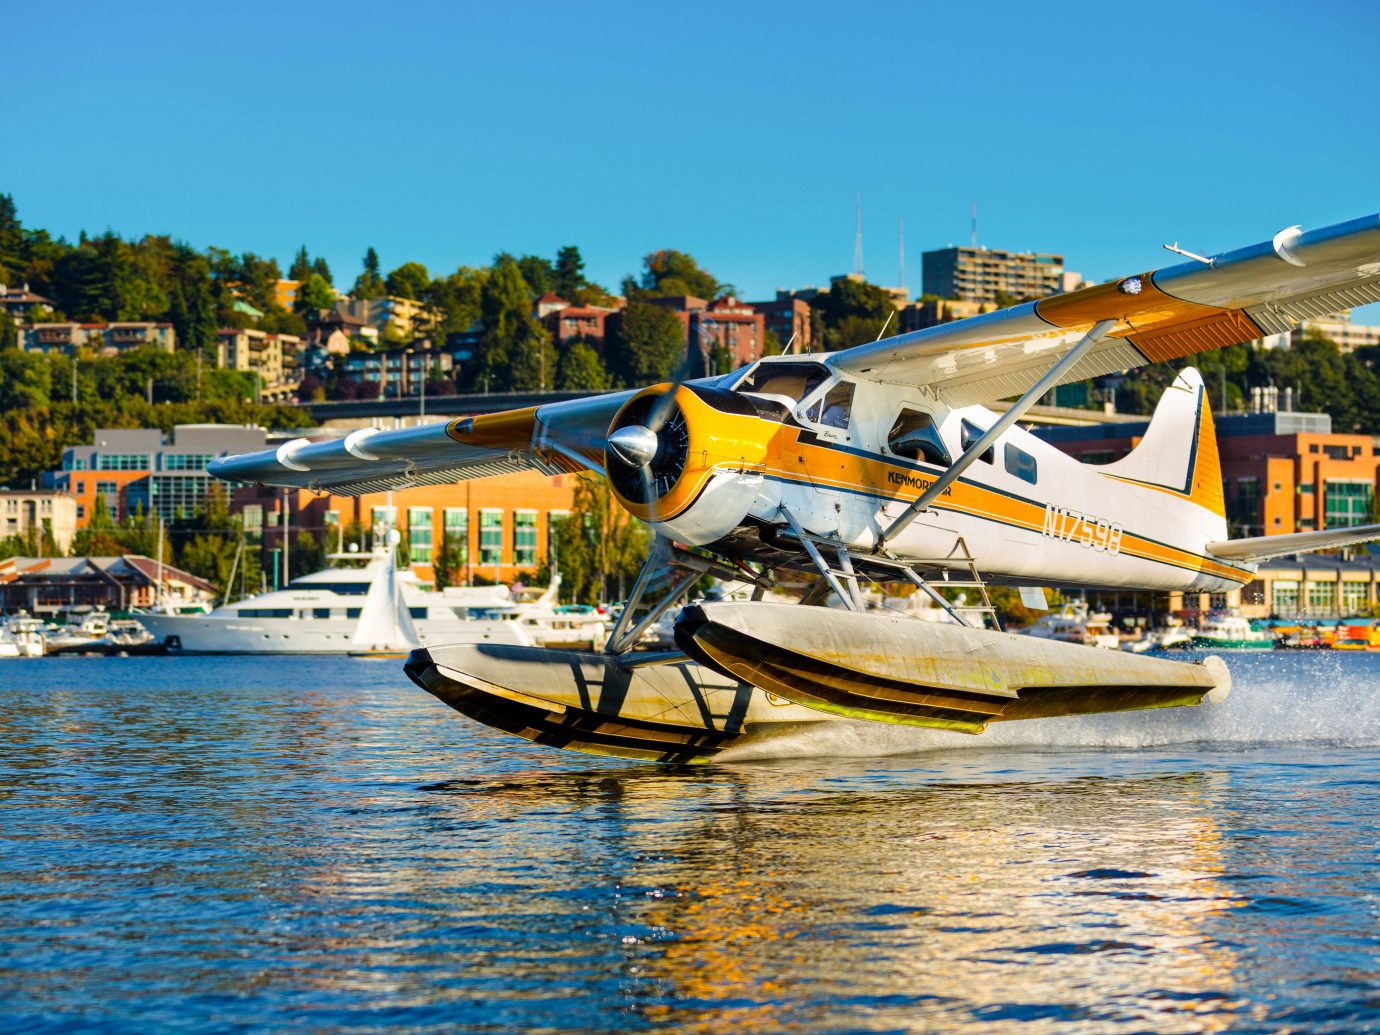 Trip Ideas sky outdoor water seaplane airplane water transportation aircraft Boat waterway atmosphere of earth light aircraft yellow leisure reflection boating aviation Harbor